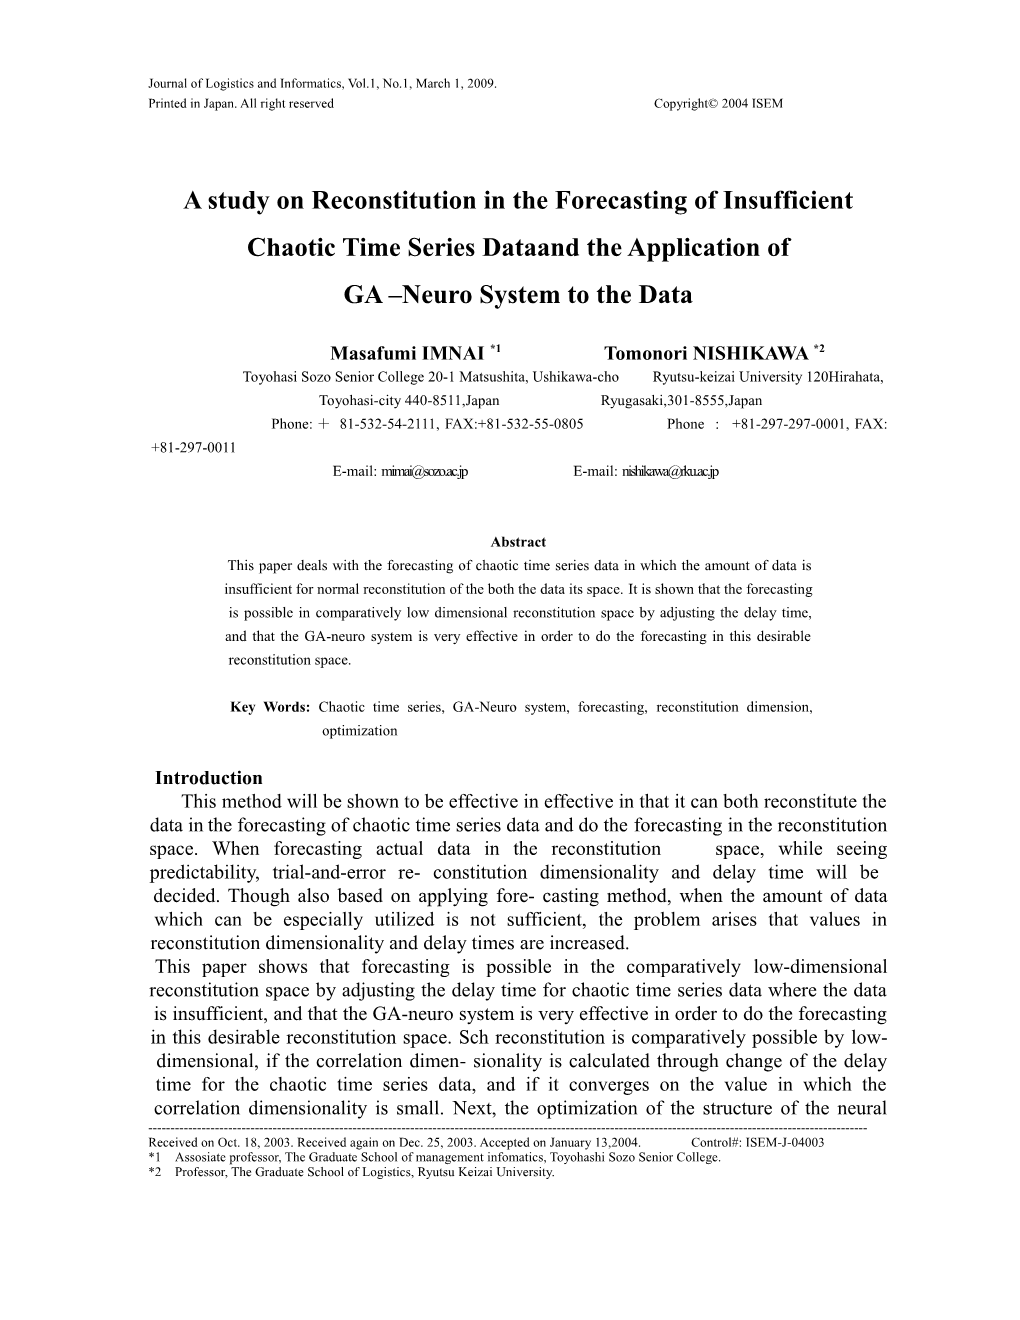 A Study on Reconstitution in the Forecasting of Insufficient